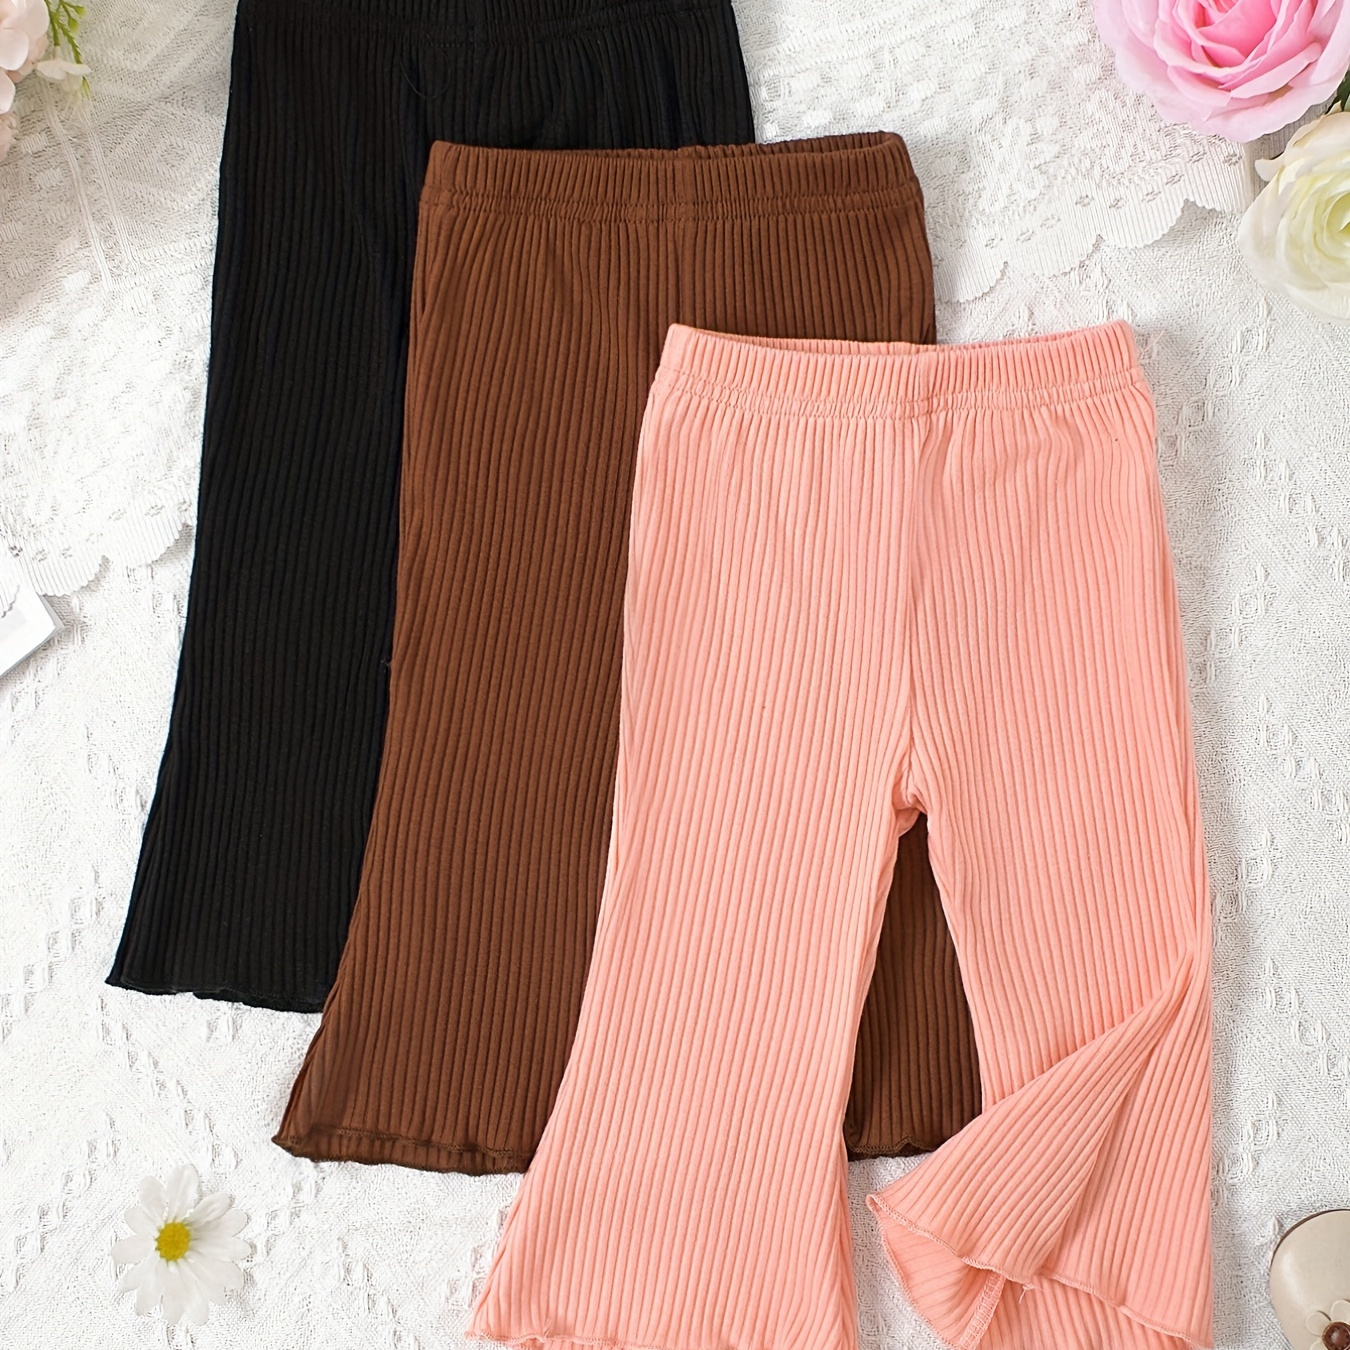 

Baby Flared Pants Girls Elastic Ruffle Trim Casual Trousers 3pcs Set Spring And Autumn Clothes